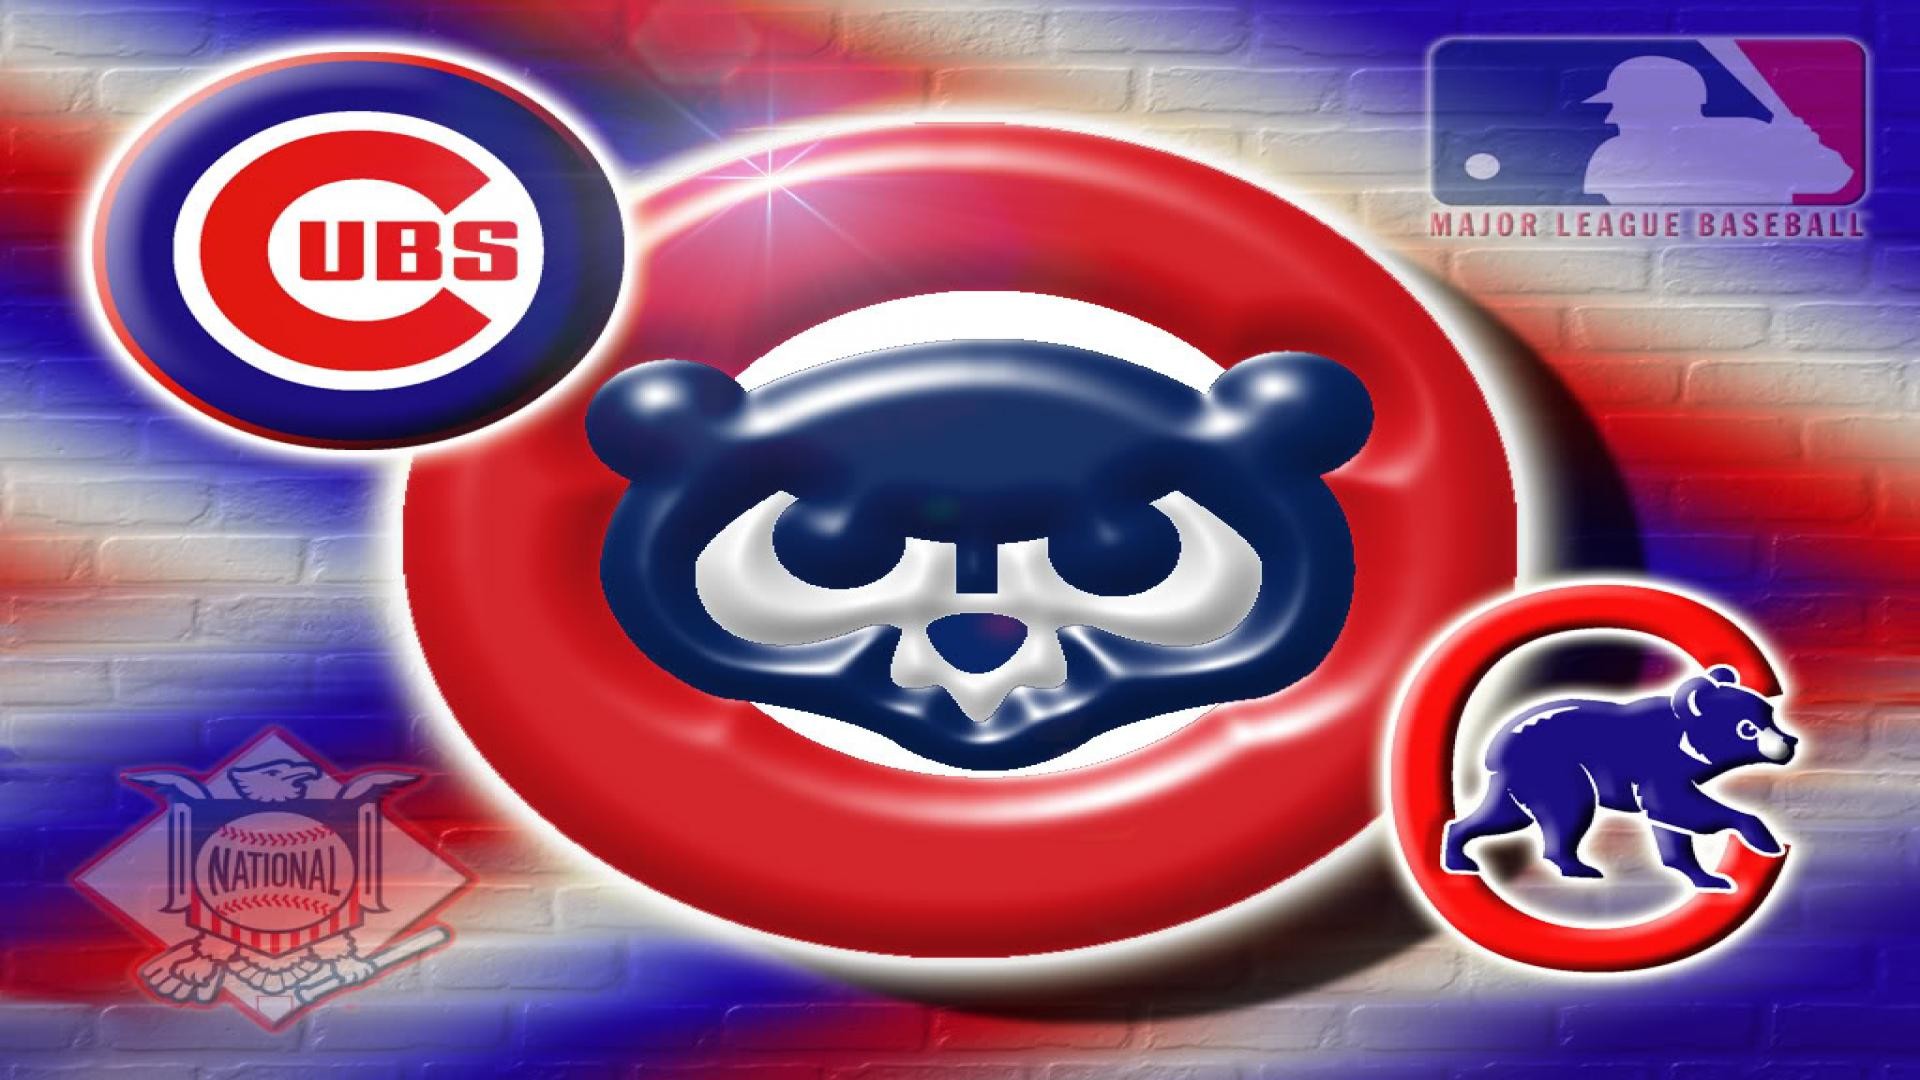 1920x1080 Chicago-Cubs-CHICAGO-CUBS-mlb-baseball-background-wallpaper-